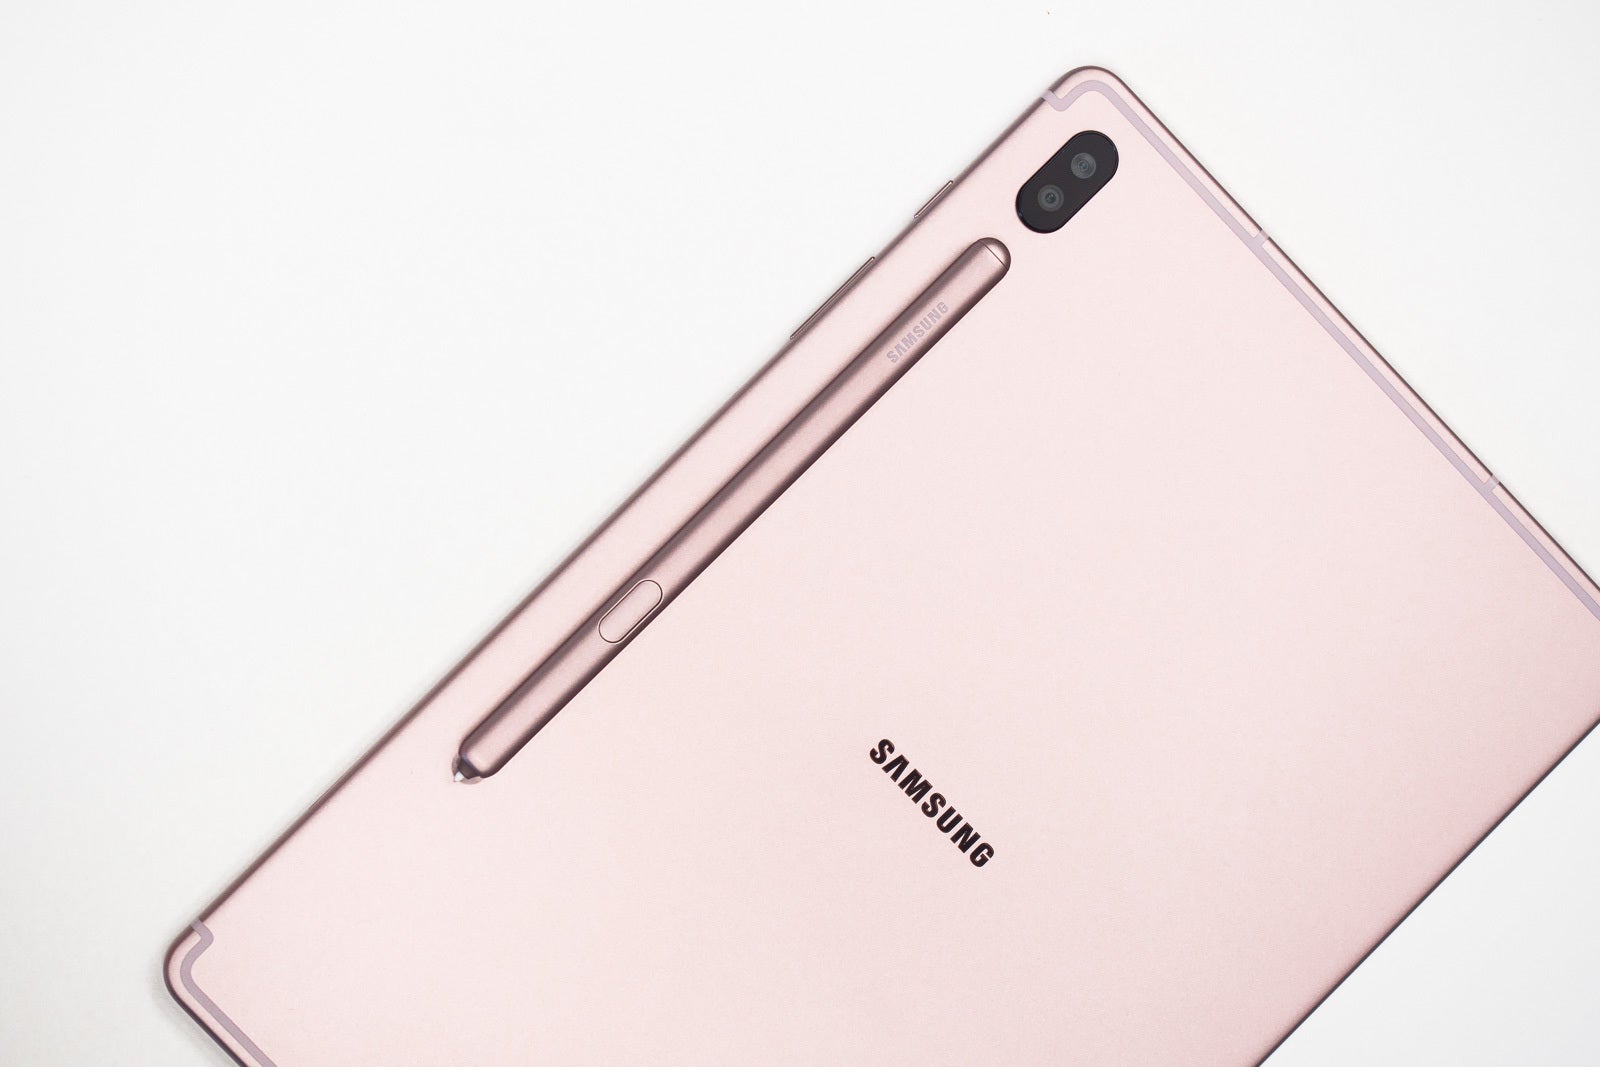 The Samsung Galaxy Tab S6 and S Pen - Samsung is developing a new tablet with S Pen support